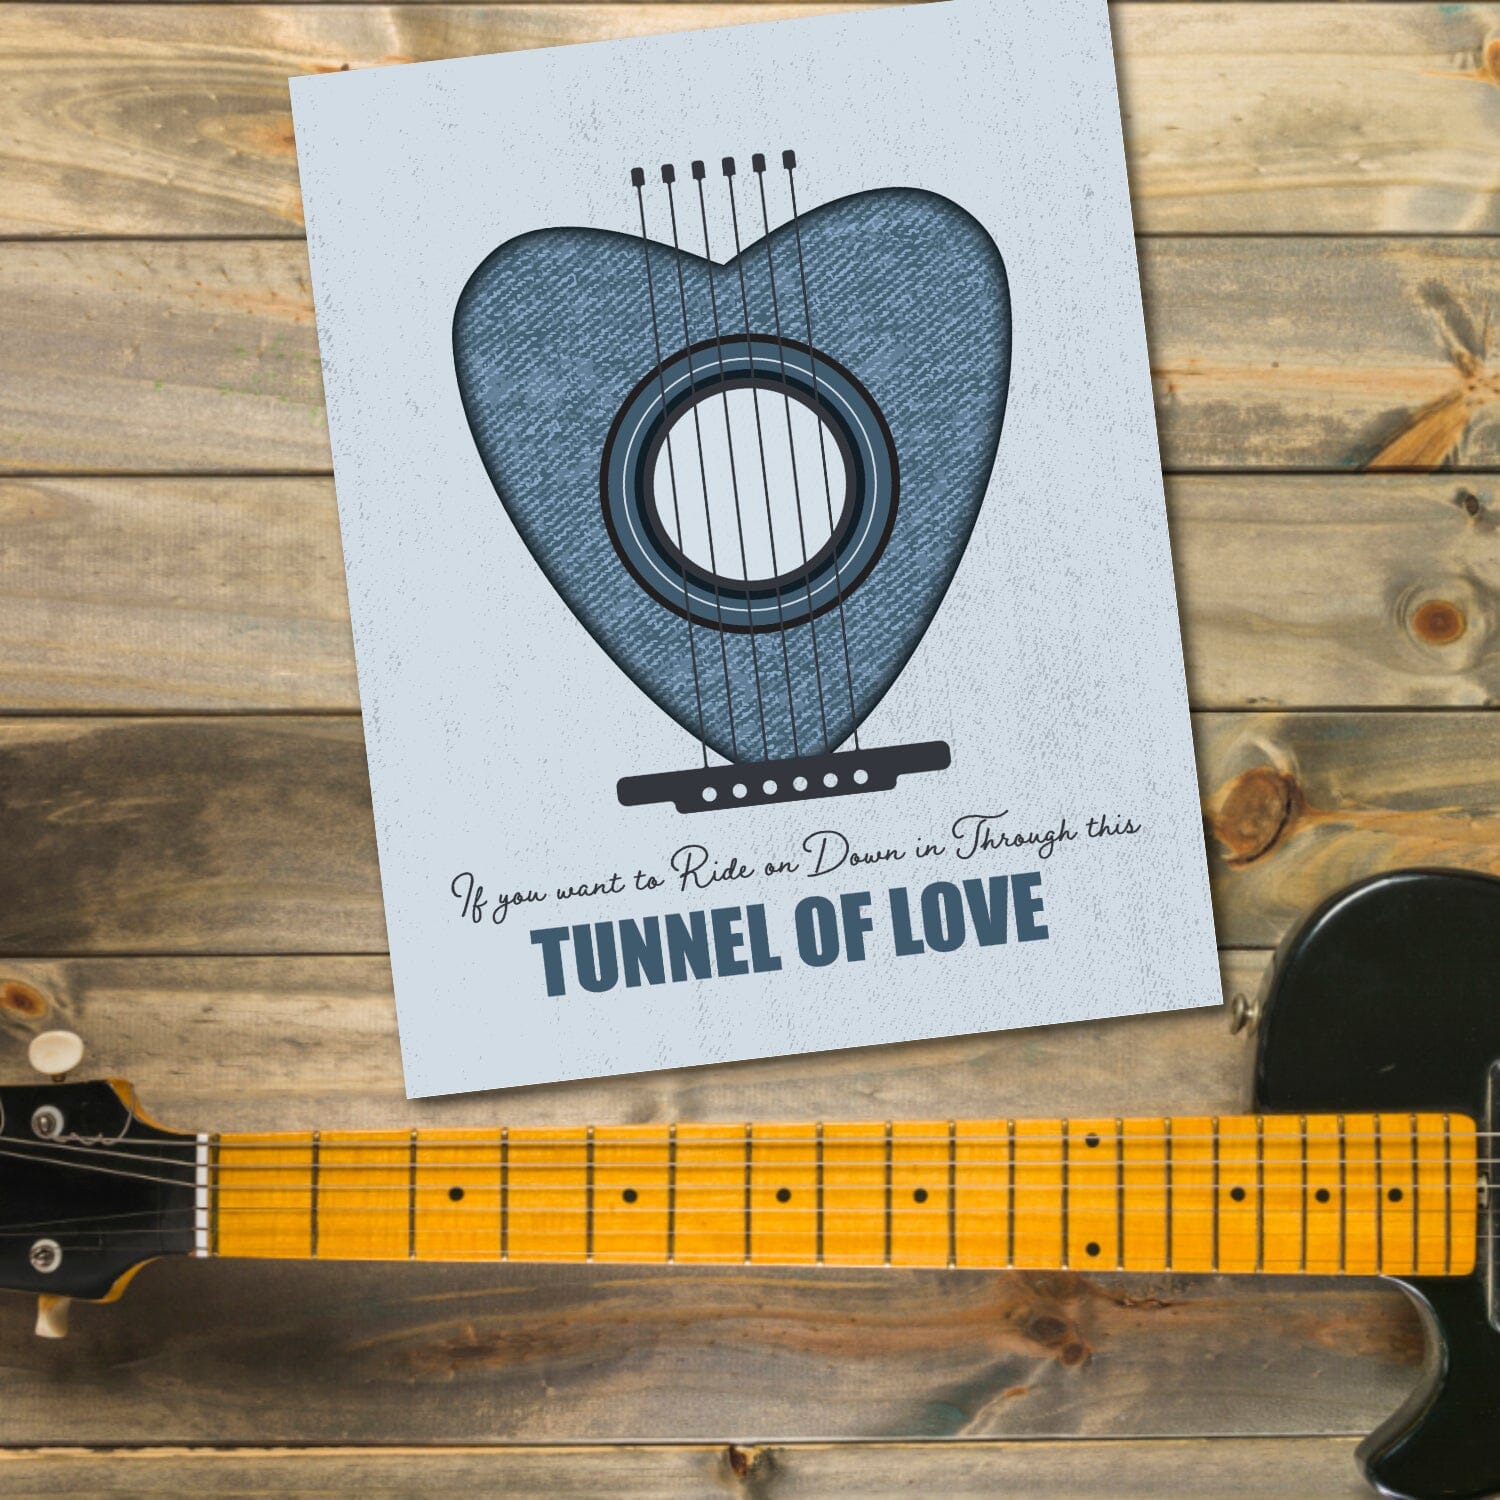 Tunnel of Love by Bruce Springsteen - Lyric Rock Music Art Song Lyrics Art Song Lyrics Art 8x10 Unframed Print 